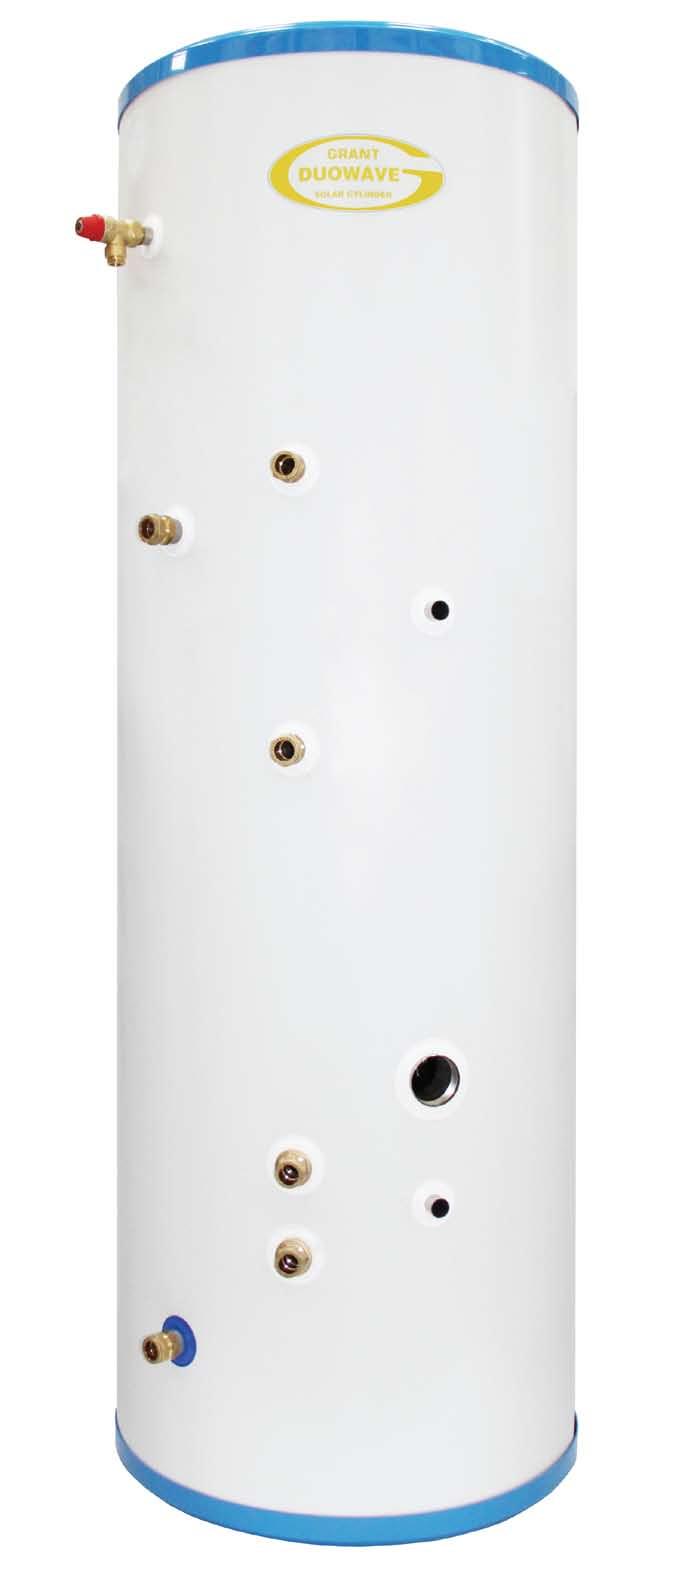 electric boiler. They are particularly suitable for use with solar hot water systems like rant Solar Thermal.